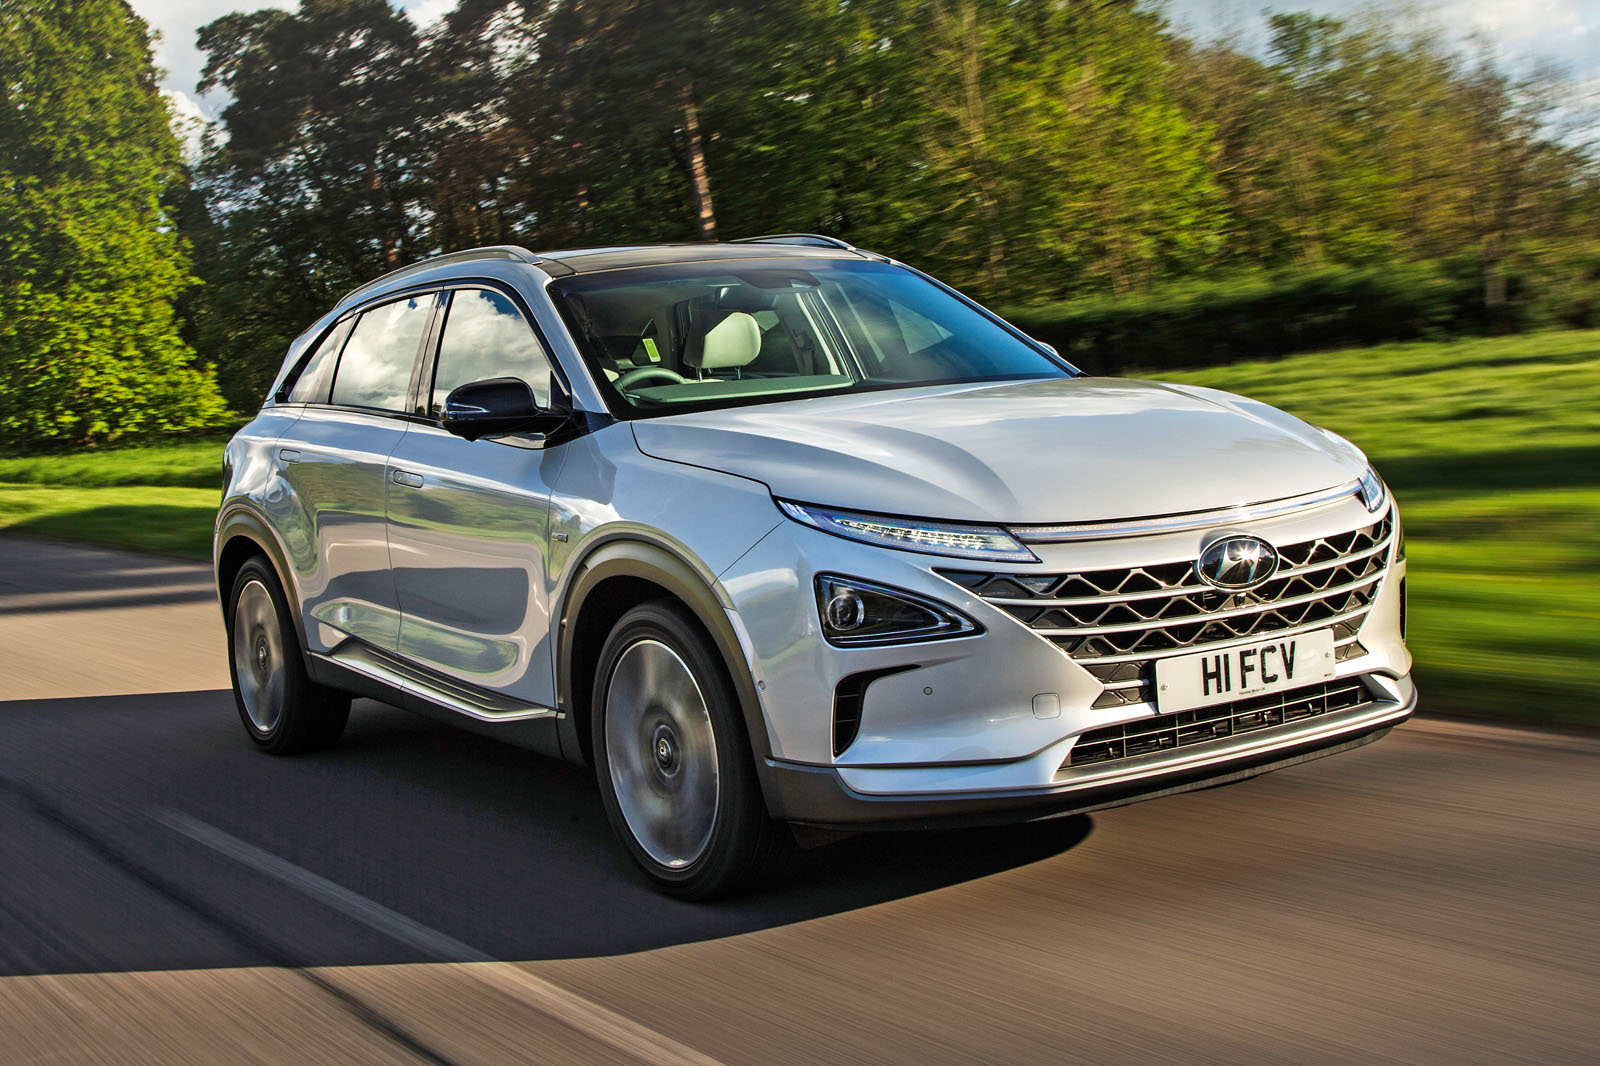 Hyundai showcases new fuel efficiency and connectivity concepts